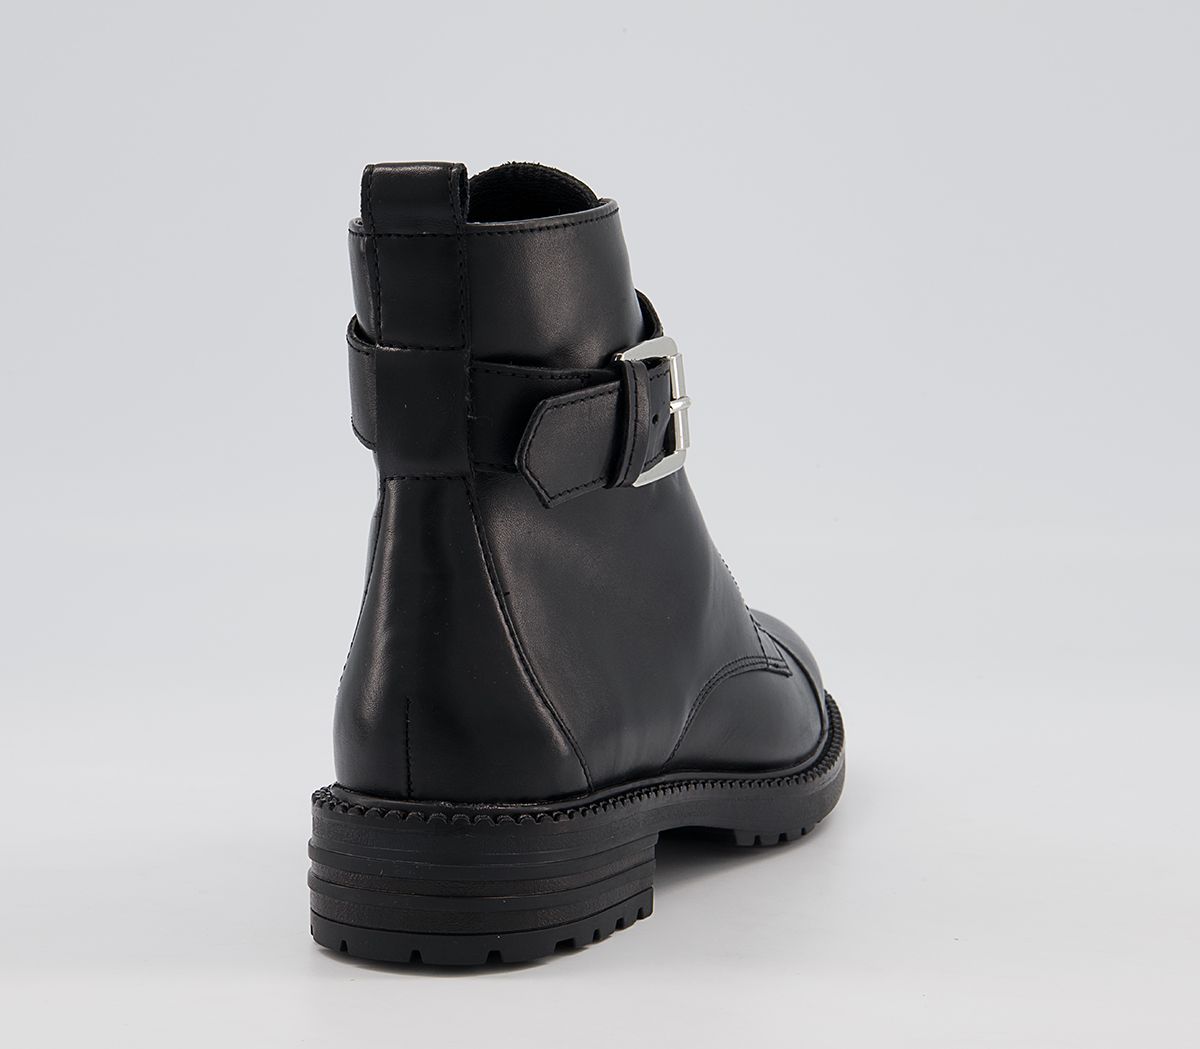 Office Alpaca Buckle Lace up Biker Boots Black Leather - Ankle Boots